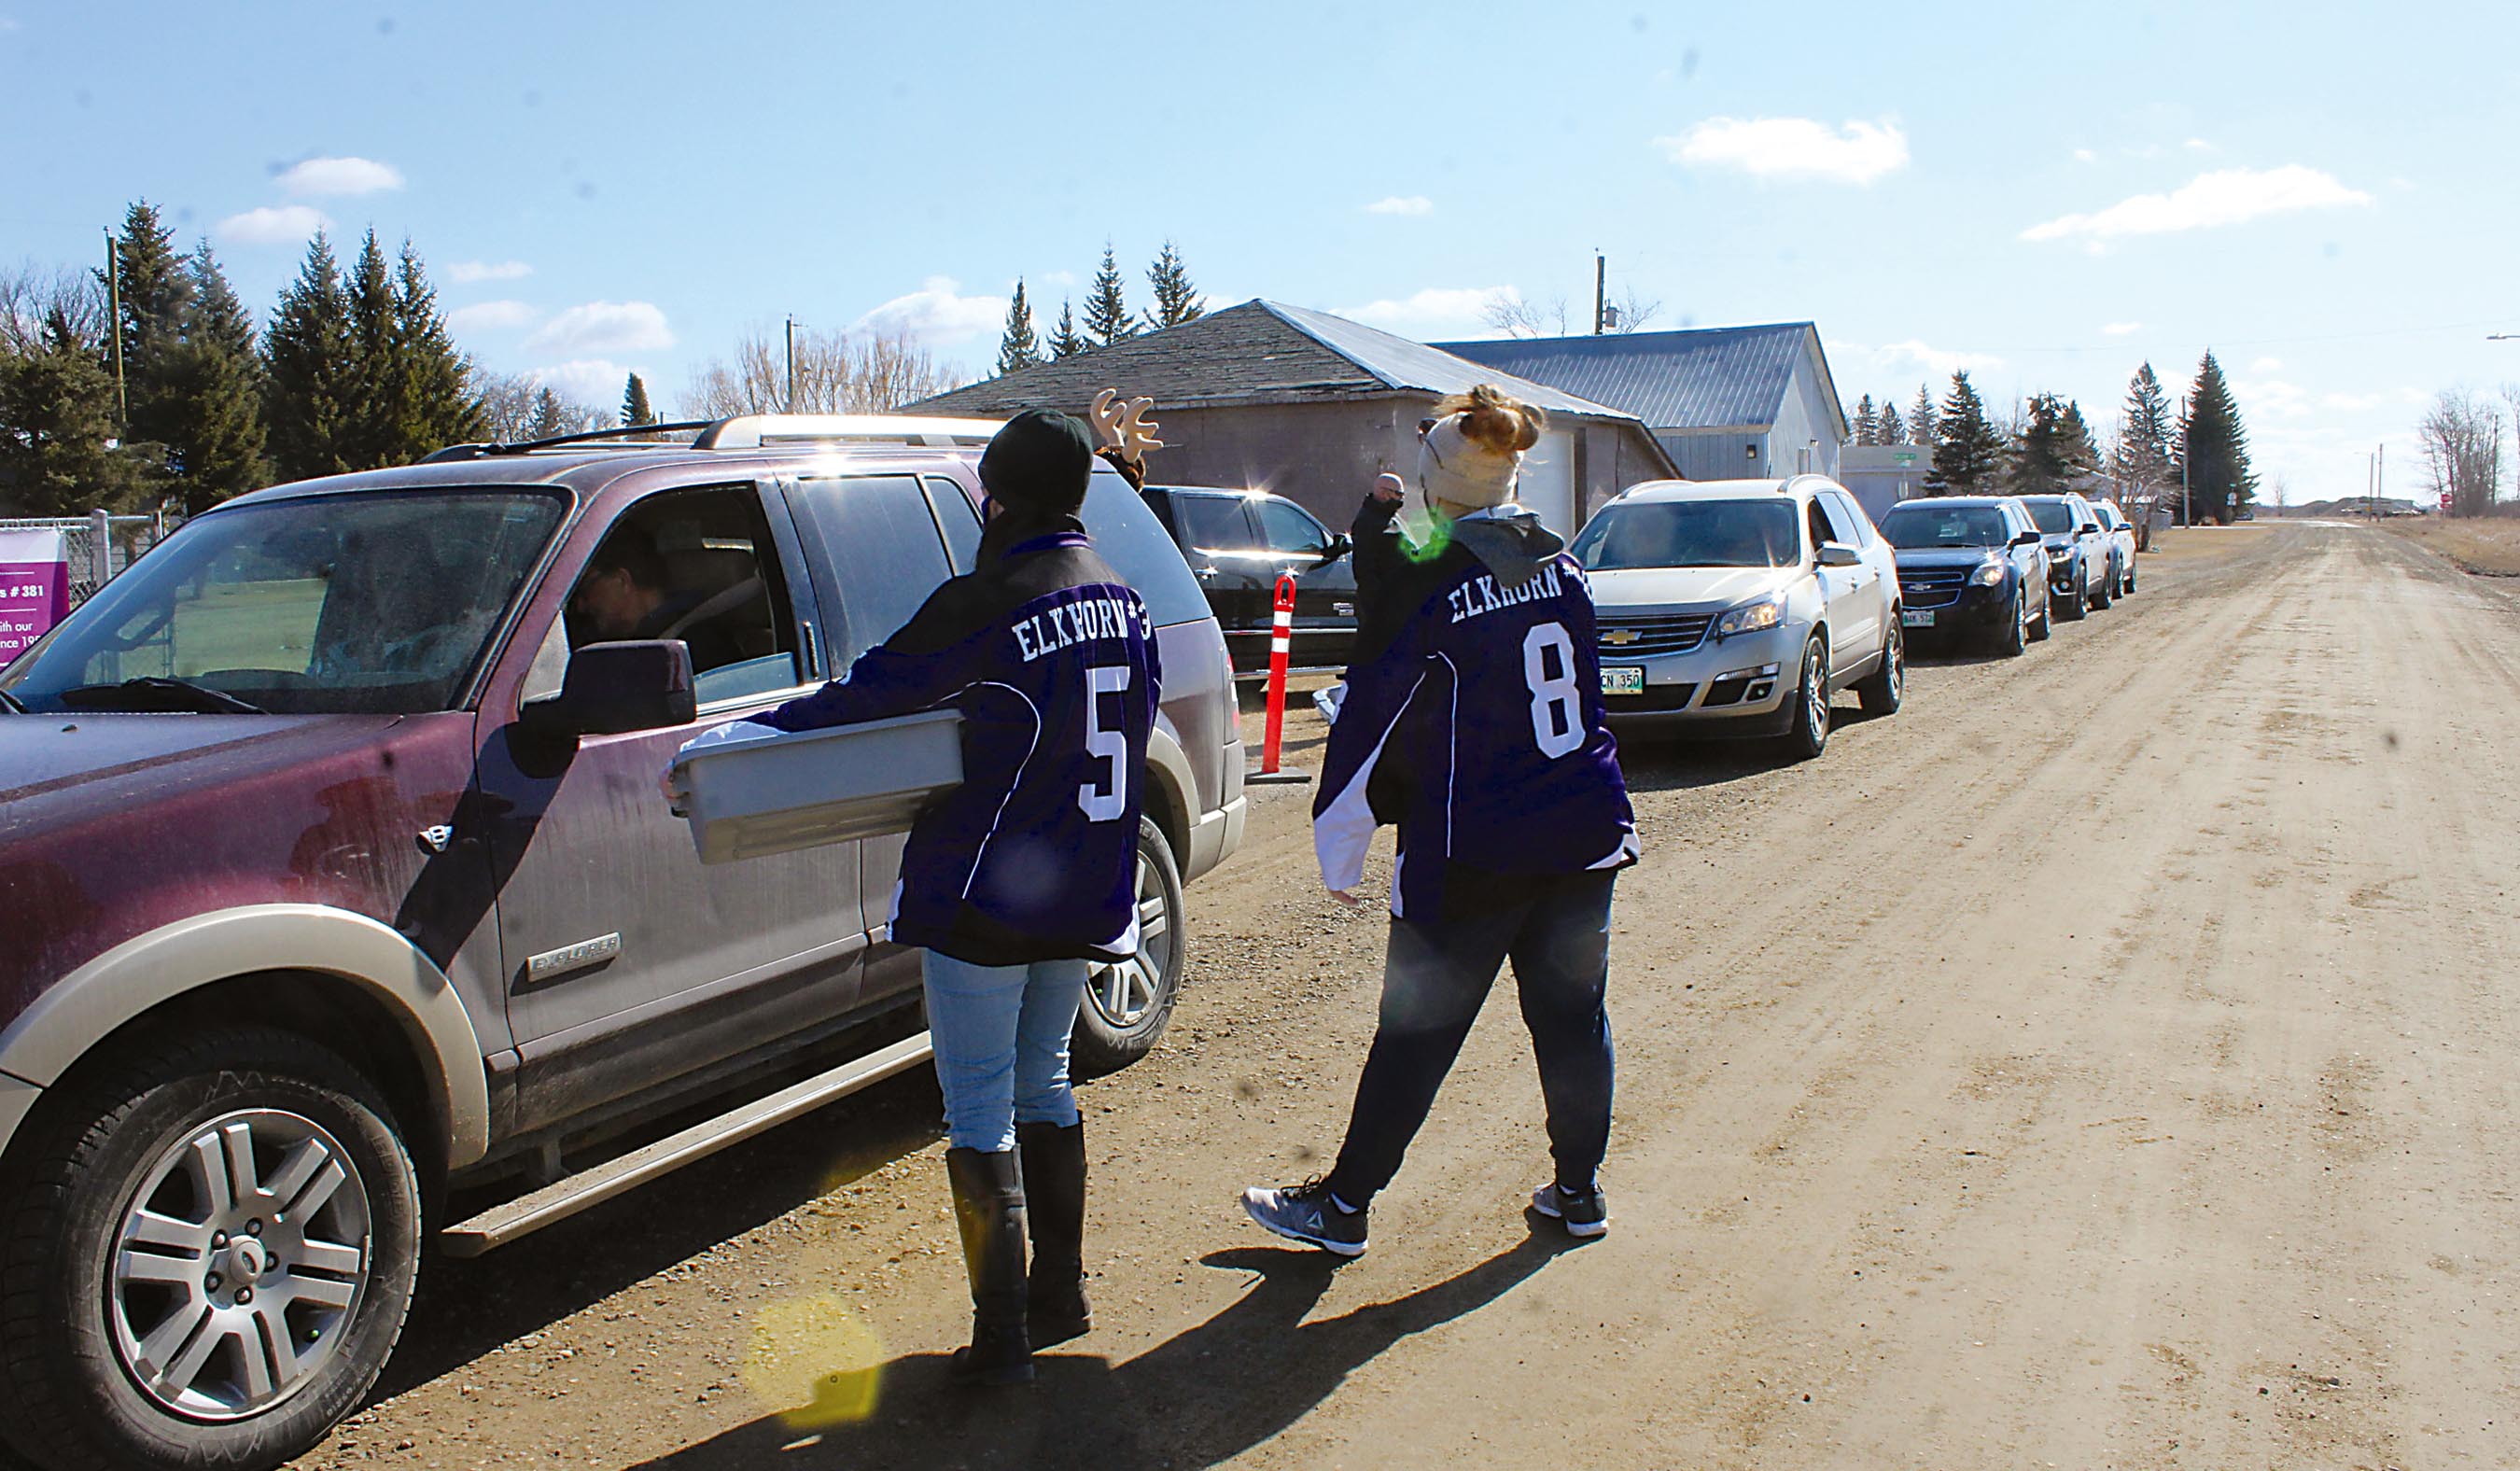 There was a long line of vehicles for a free drive-by hot dog lunch that was hosted by the Elkhorn Elks in Elkhorn on March 27. The Elks wanted to thank all essential workers for serving their communities during the Covid-19 pandemic.